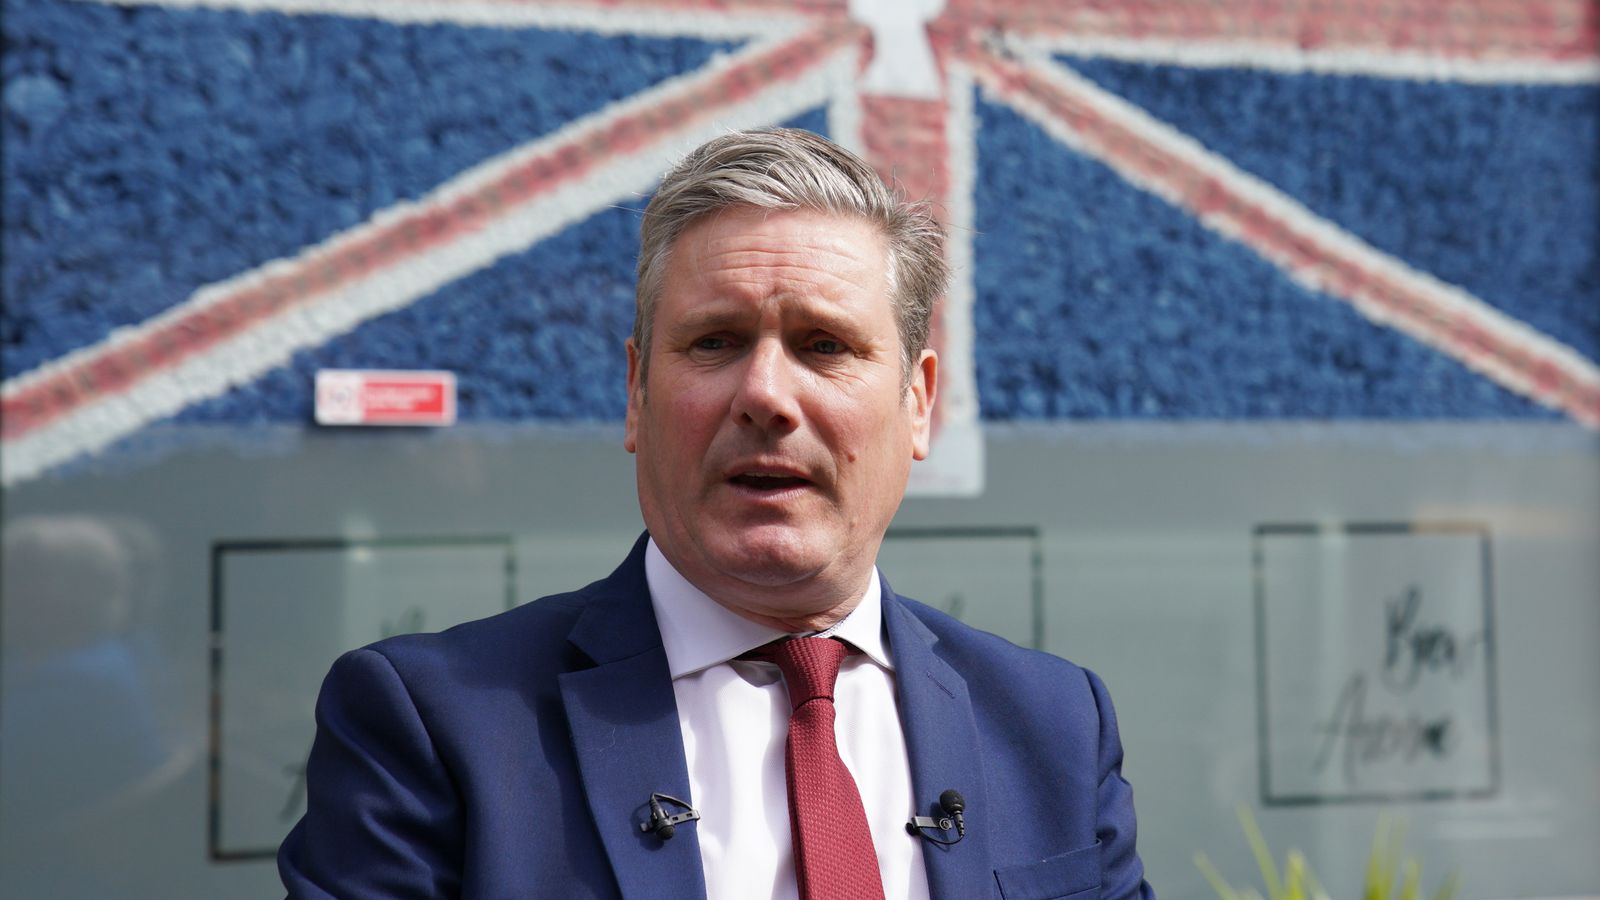 Sir Keir Starmer rules out rejoining EU as he launches Labour's Brexit plan